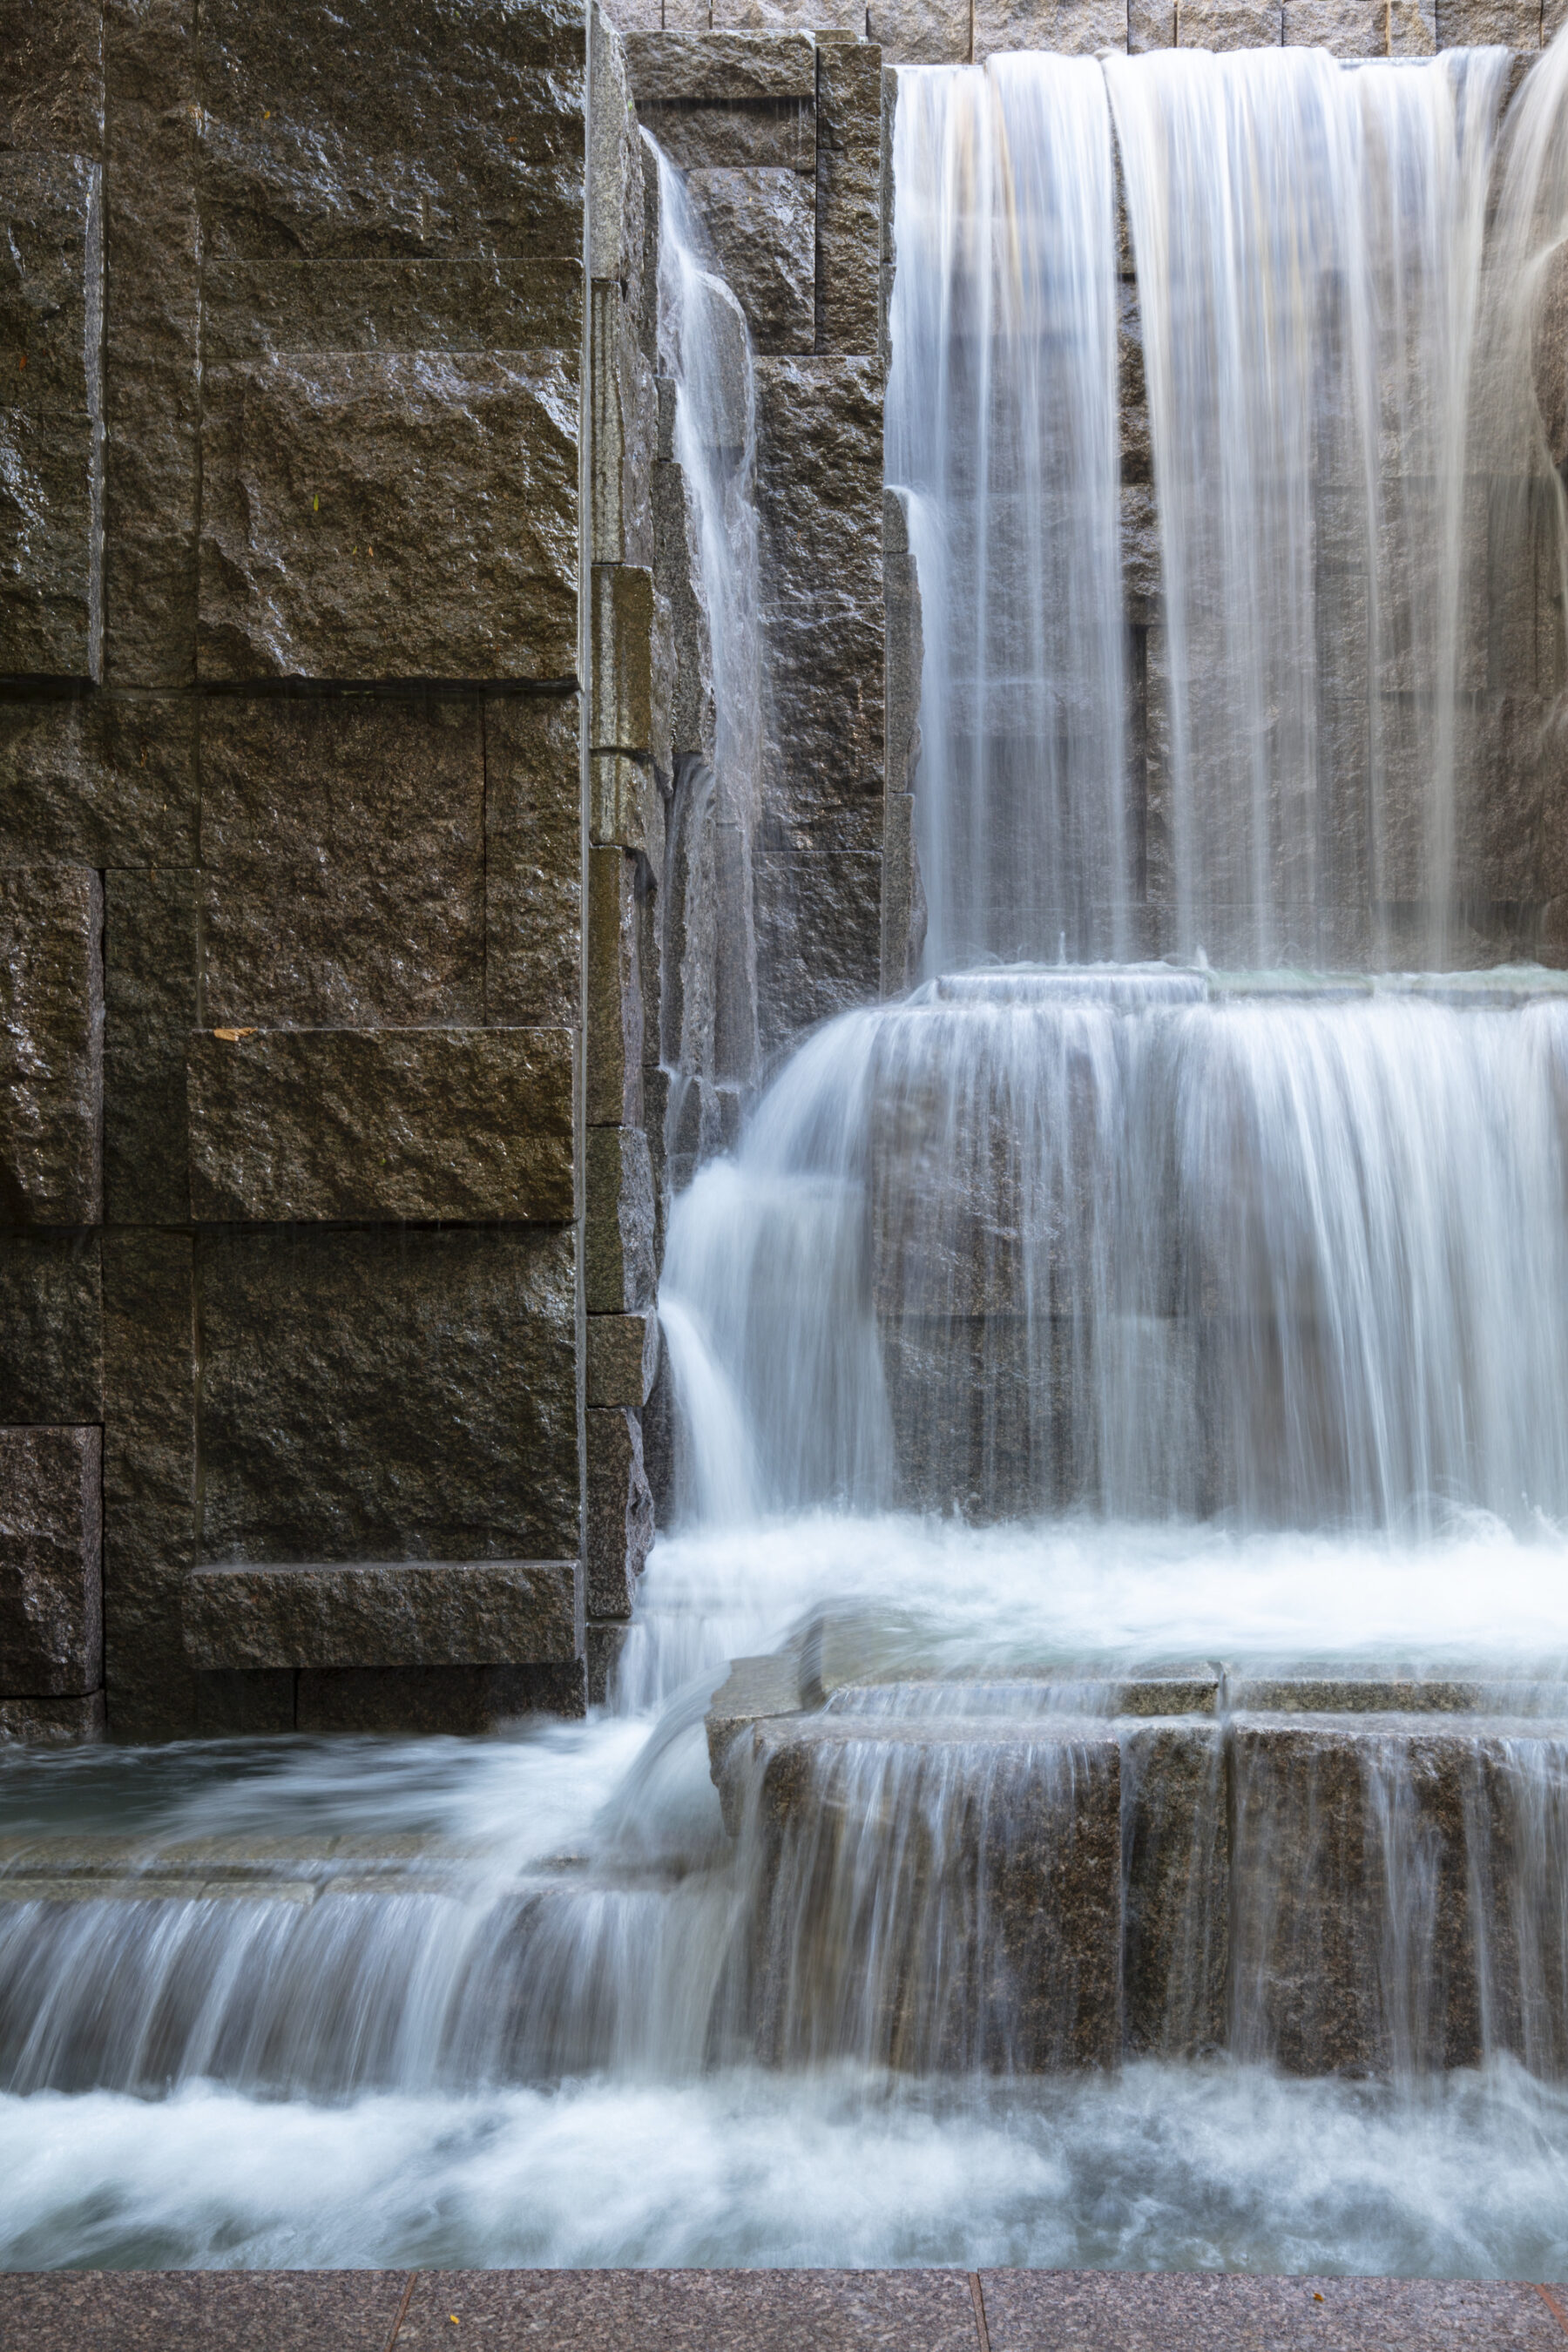 Close up photo of waterfall with three tiers and detail of stone materials